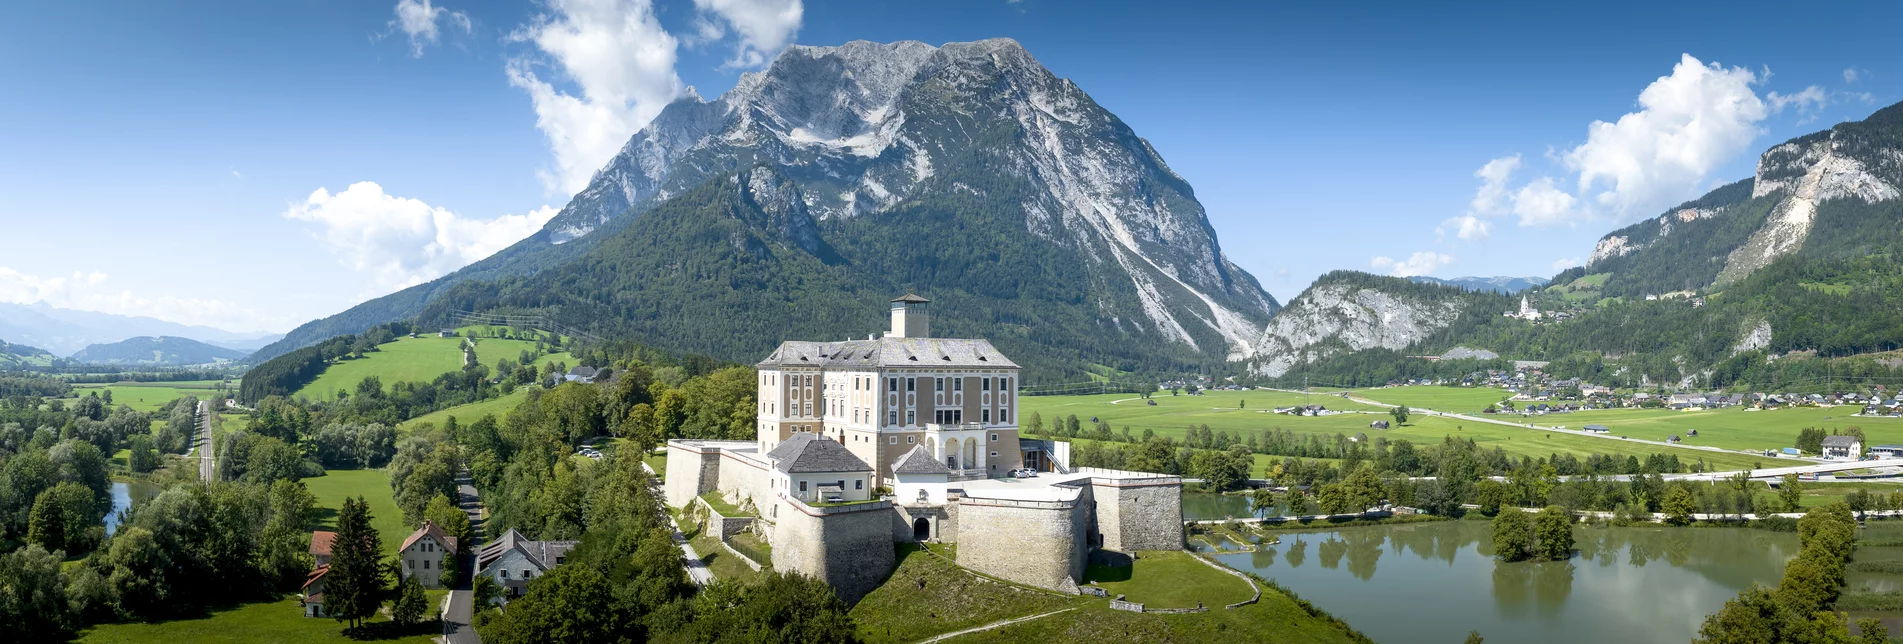 Trautenfels Castle with Grimming in the background | © Steiermark Tourismus | Tom Lamm